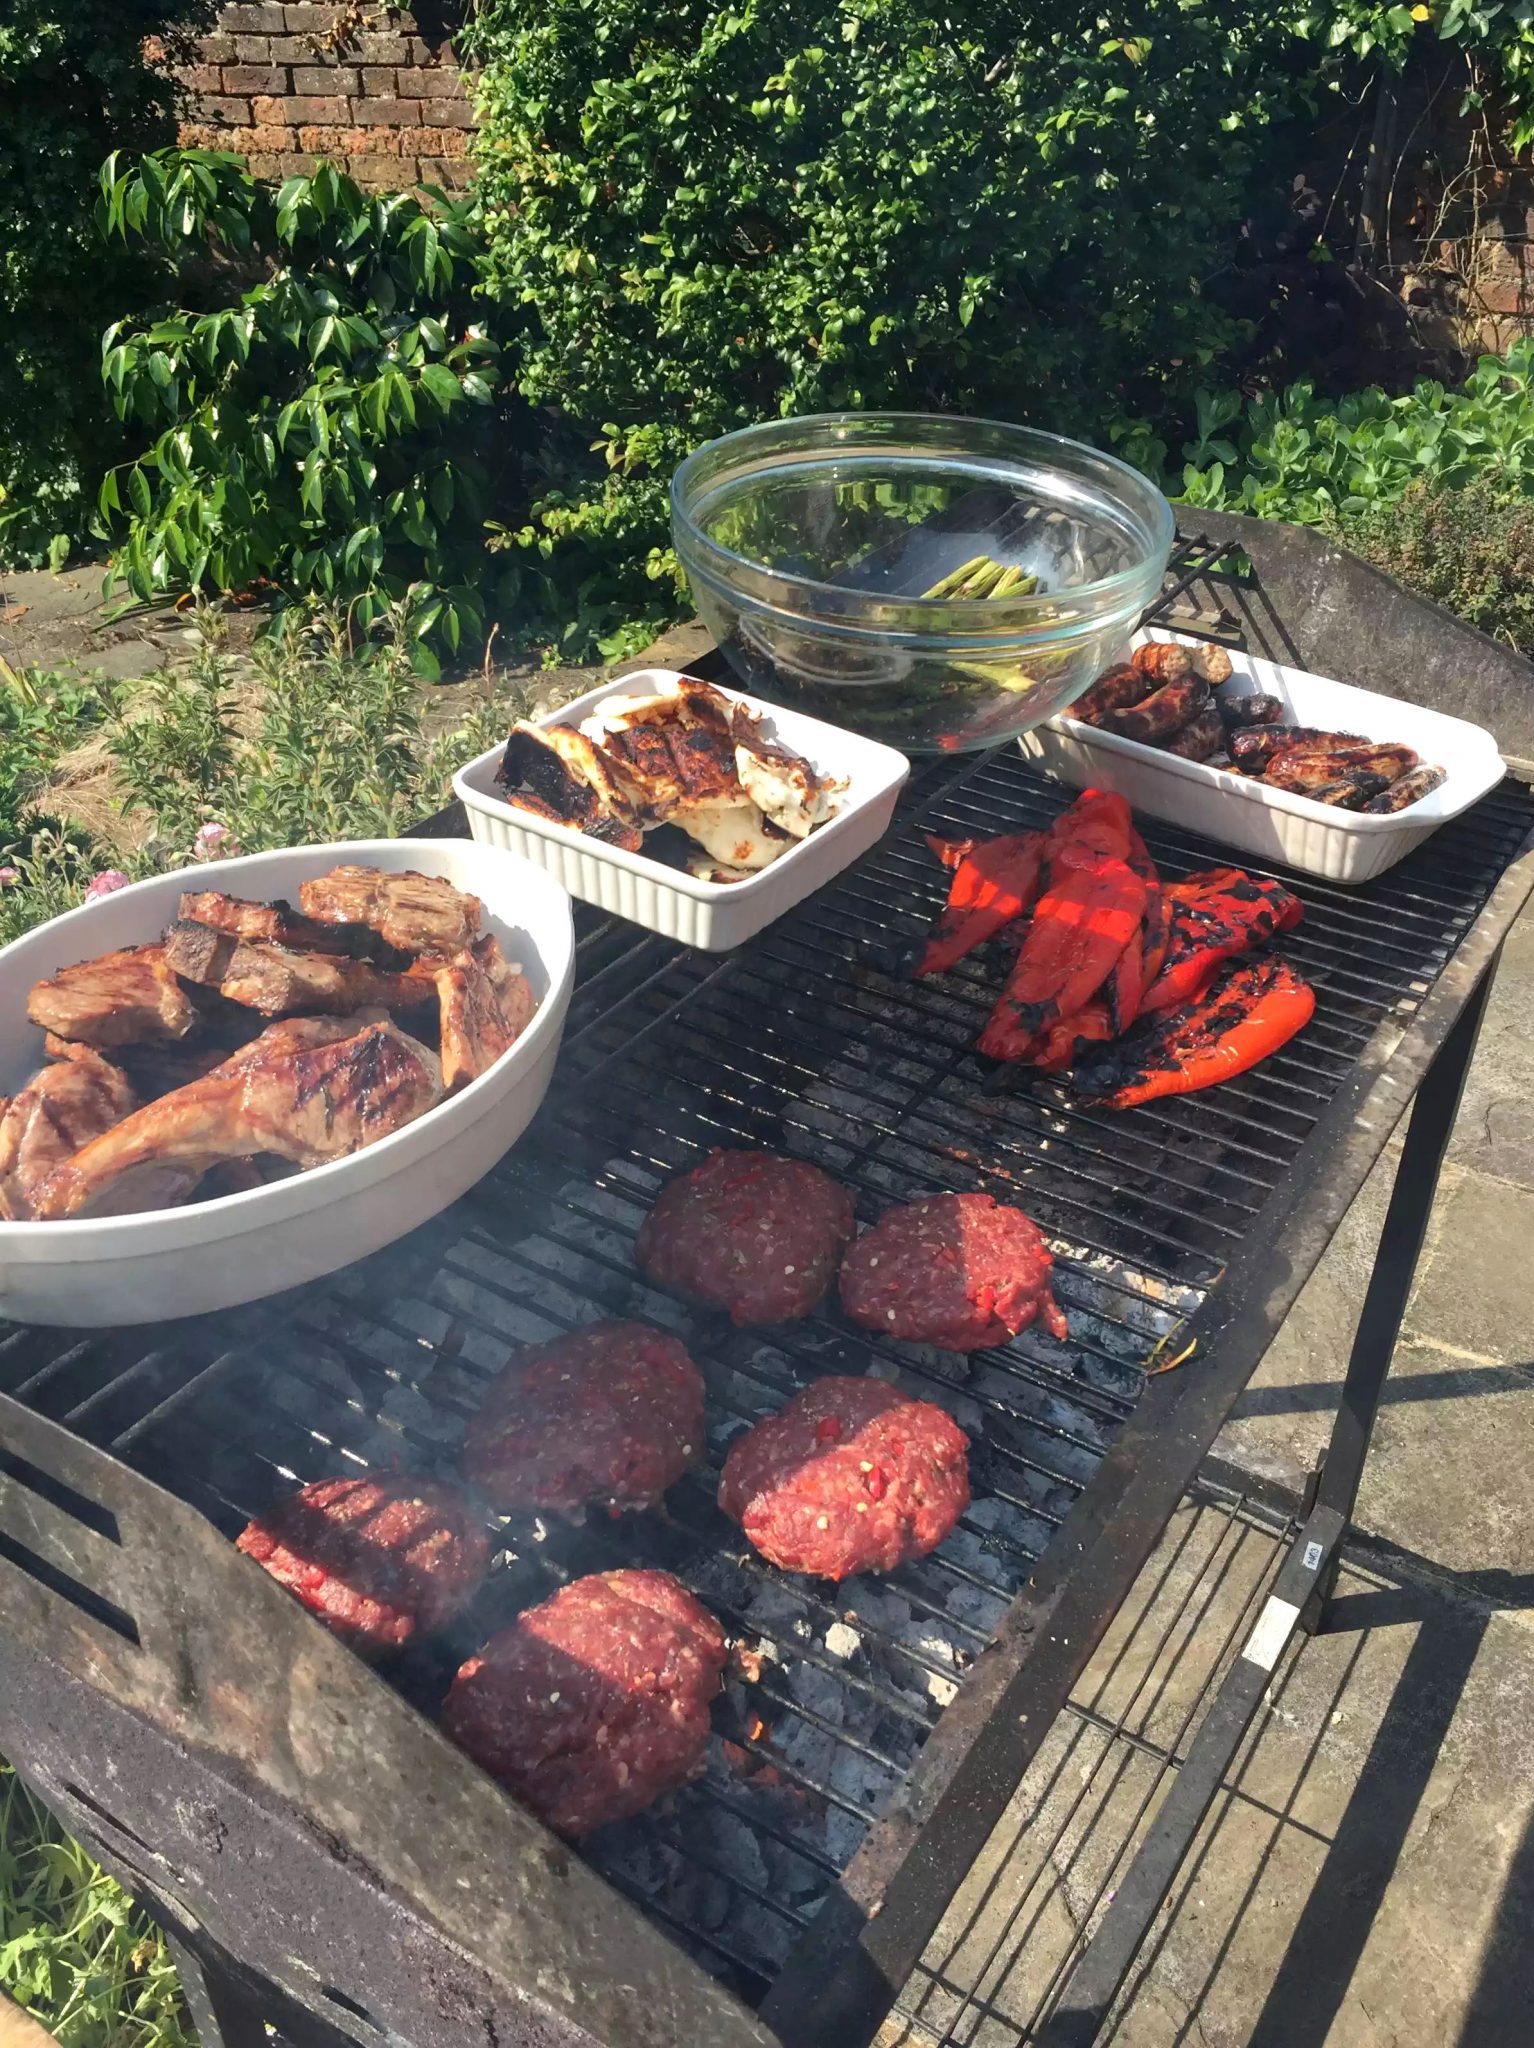 BBQ St Albans Sunshine Garden Outdoors Burgers Asparagus Peppers Lamb Sausages Salad Cheese Strawberries Mango Wine